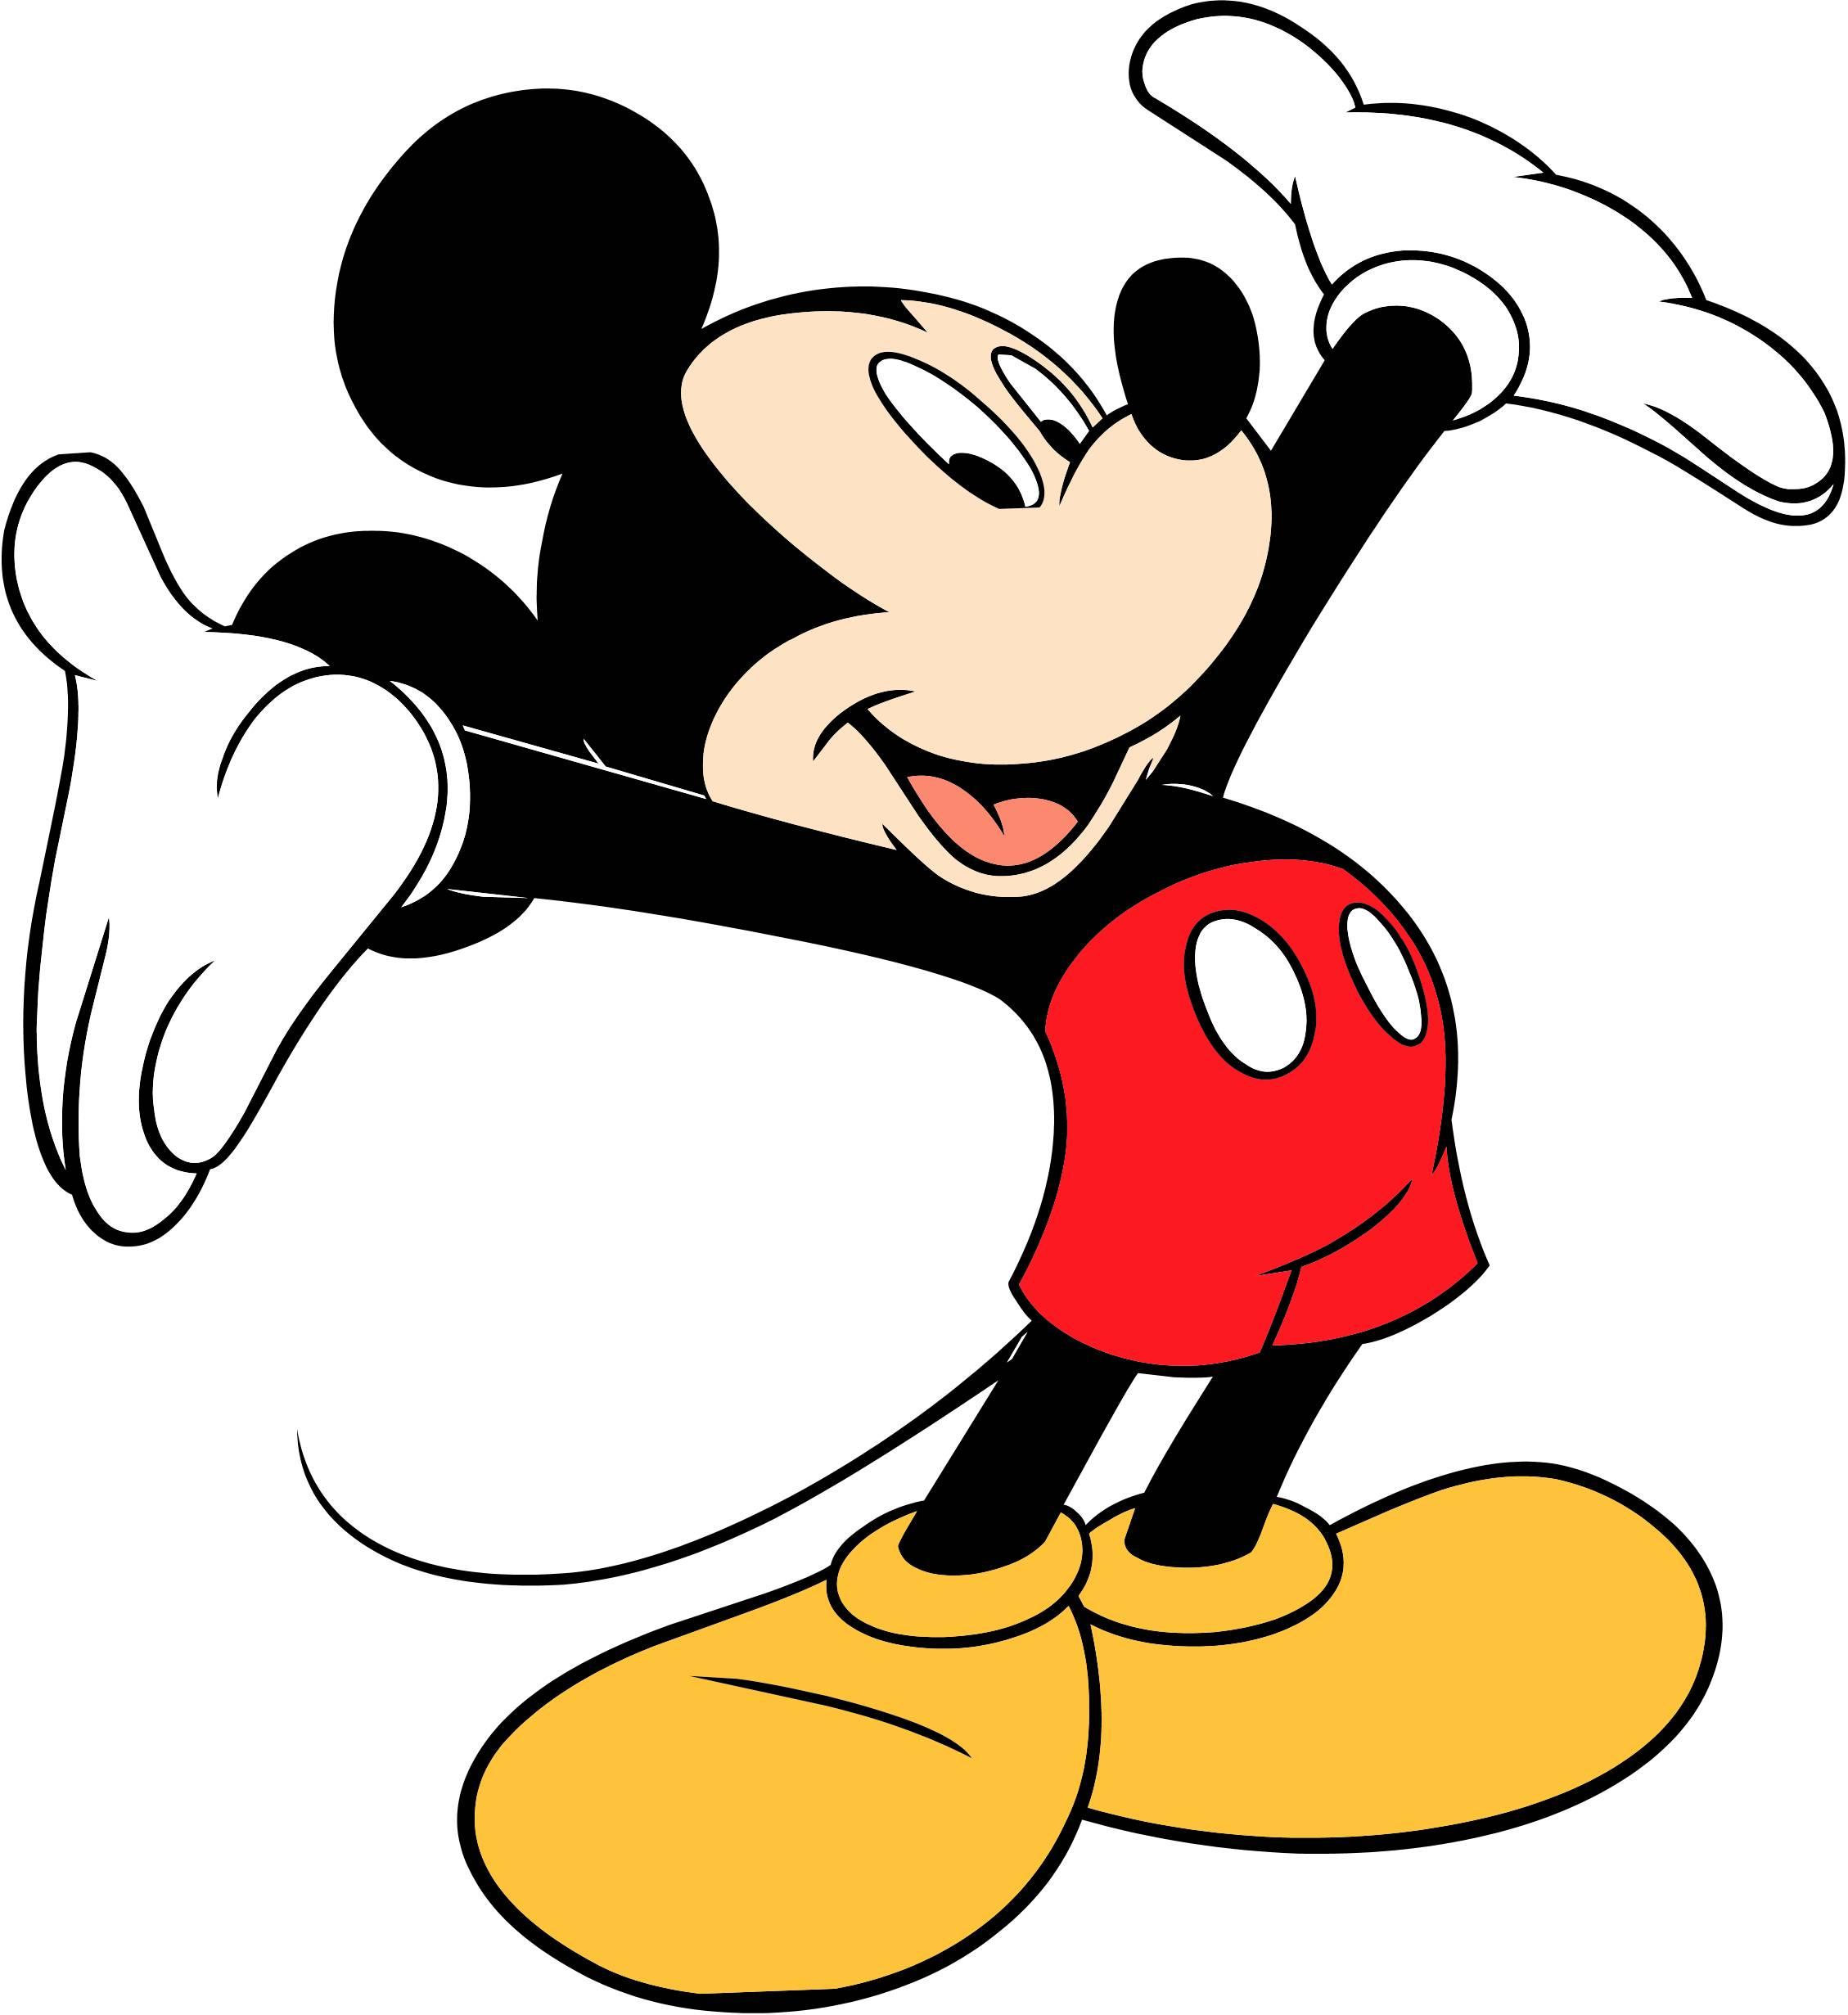 Mickey Mouse Cartoon Characters Images 14075 Full HD Wallpaper 